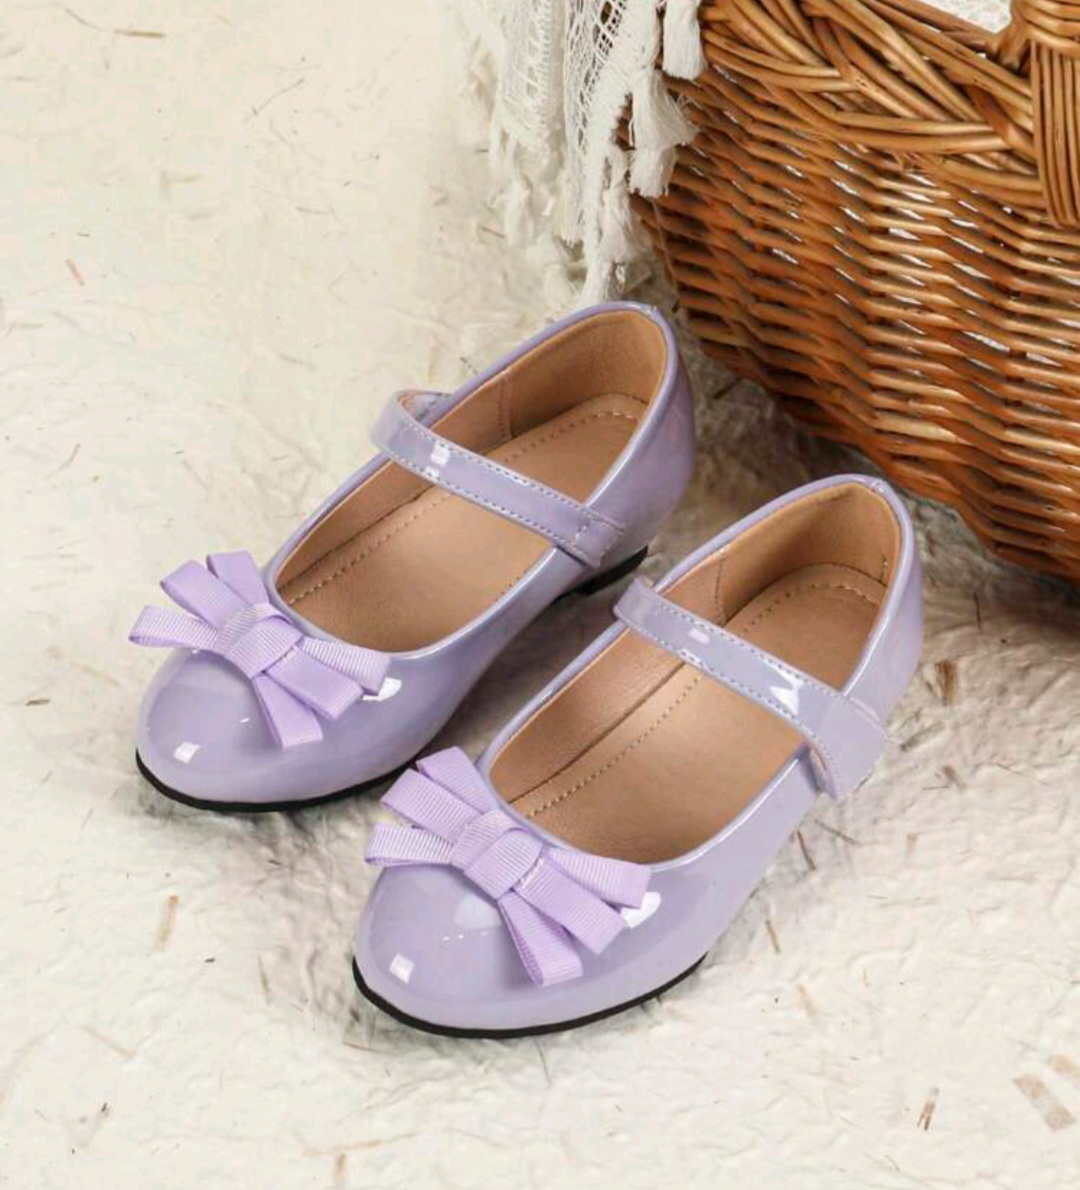 Solid Color 3cm Wedge Heel New Style Girls' Fashionable And Cute Casual Shoes With Soft Non-Slip Sole, Suitable For Parties, School, Holidays